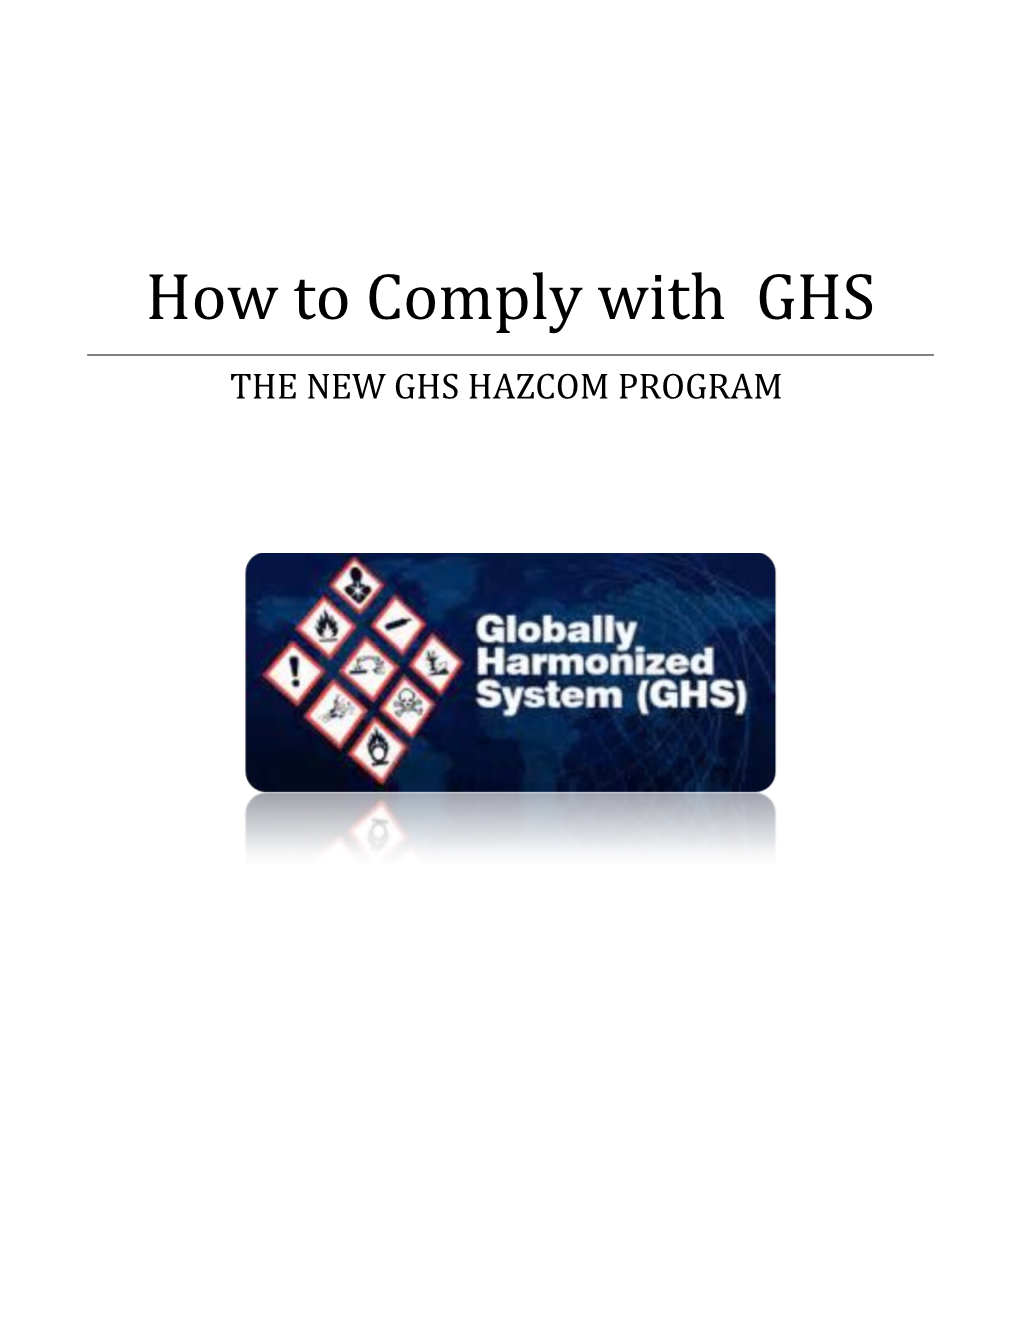 How to Comply with GHS